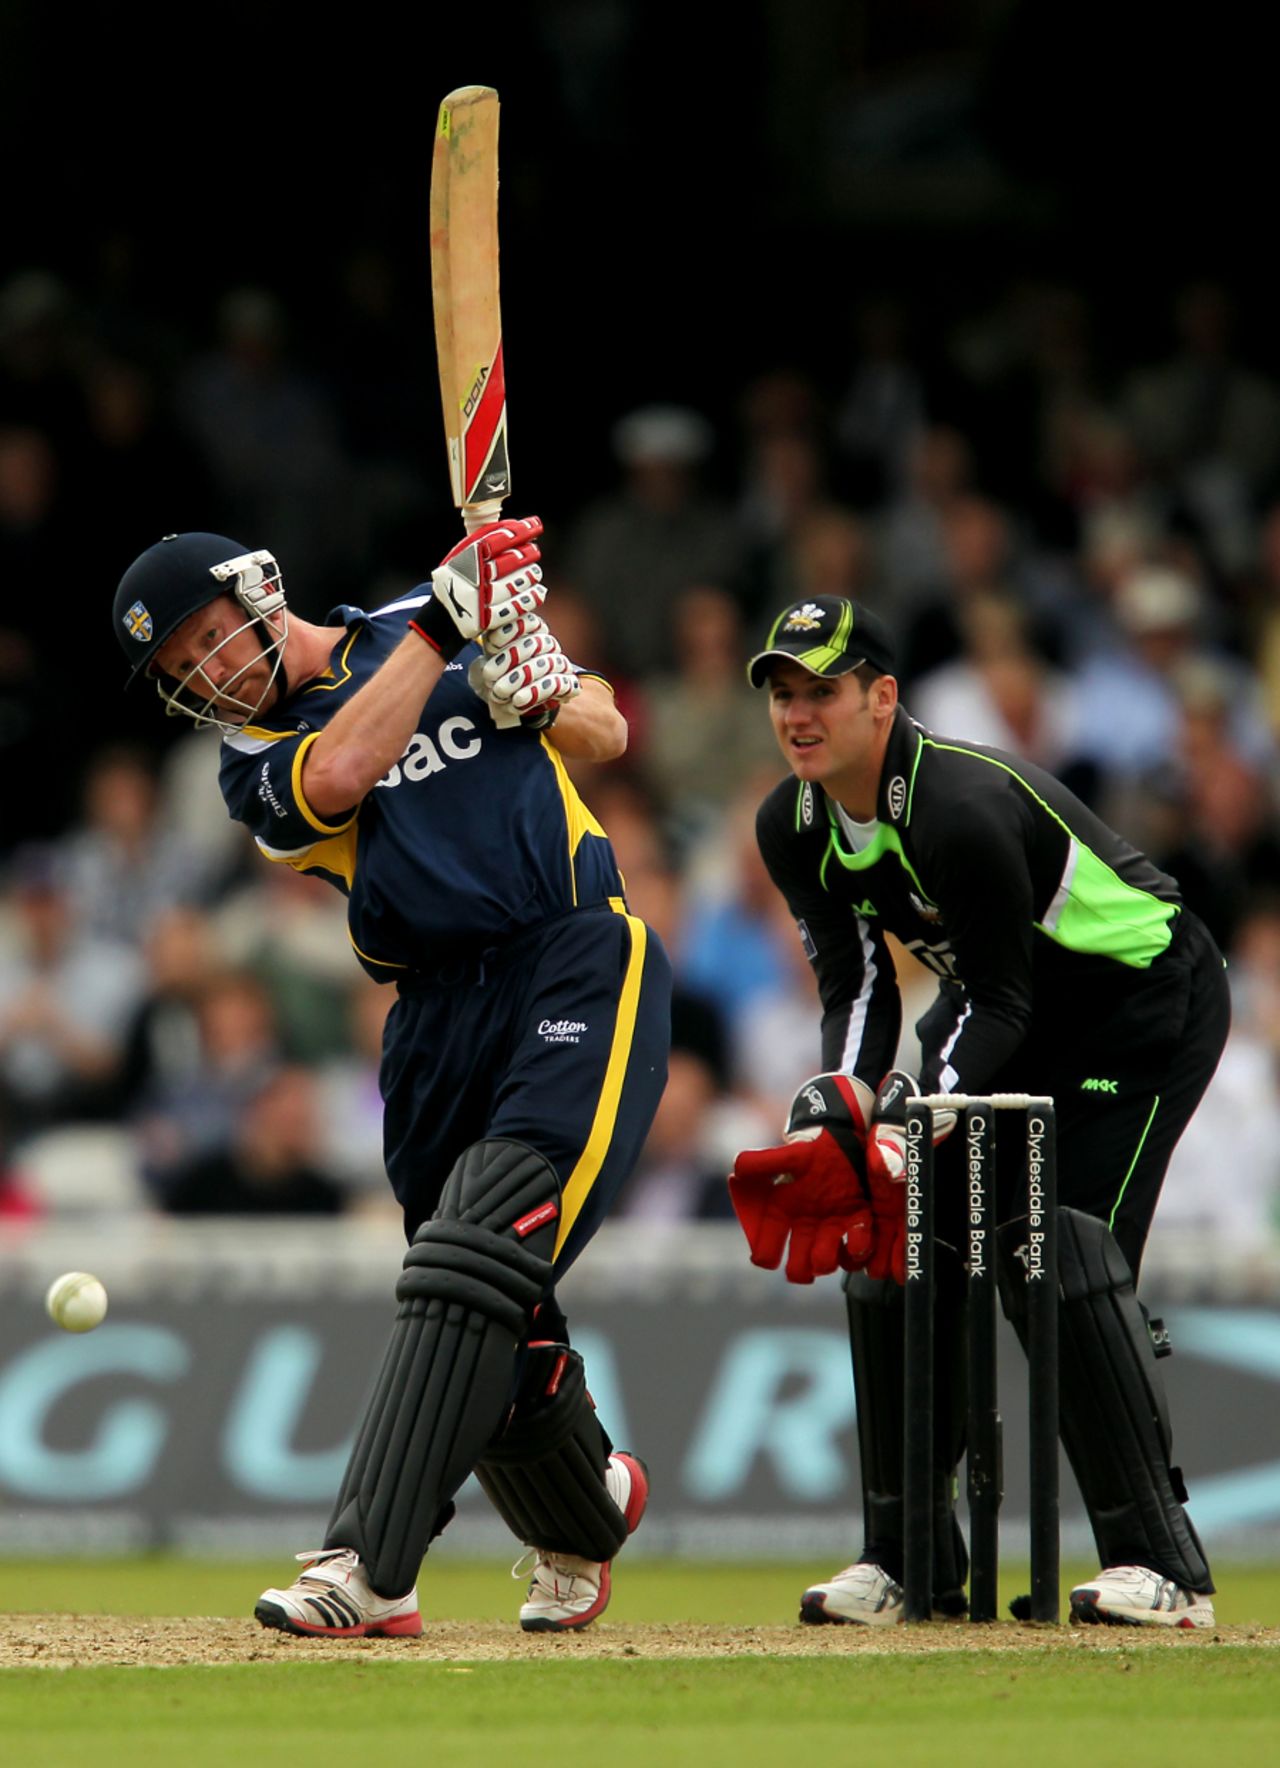 Paul Collingwood's 96 helped Durham reach 325, Surrey v Durham, Clydesdale Bank 40, The Oval, August 29 2011